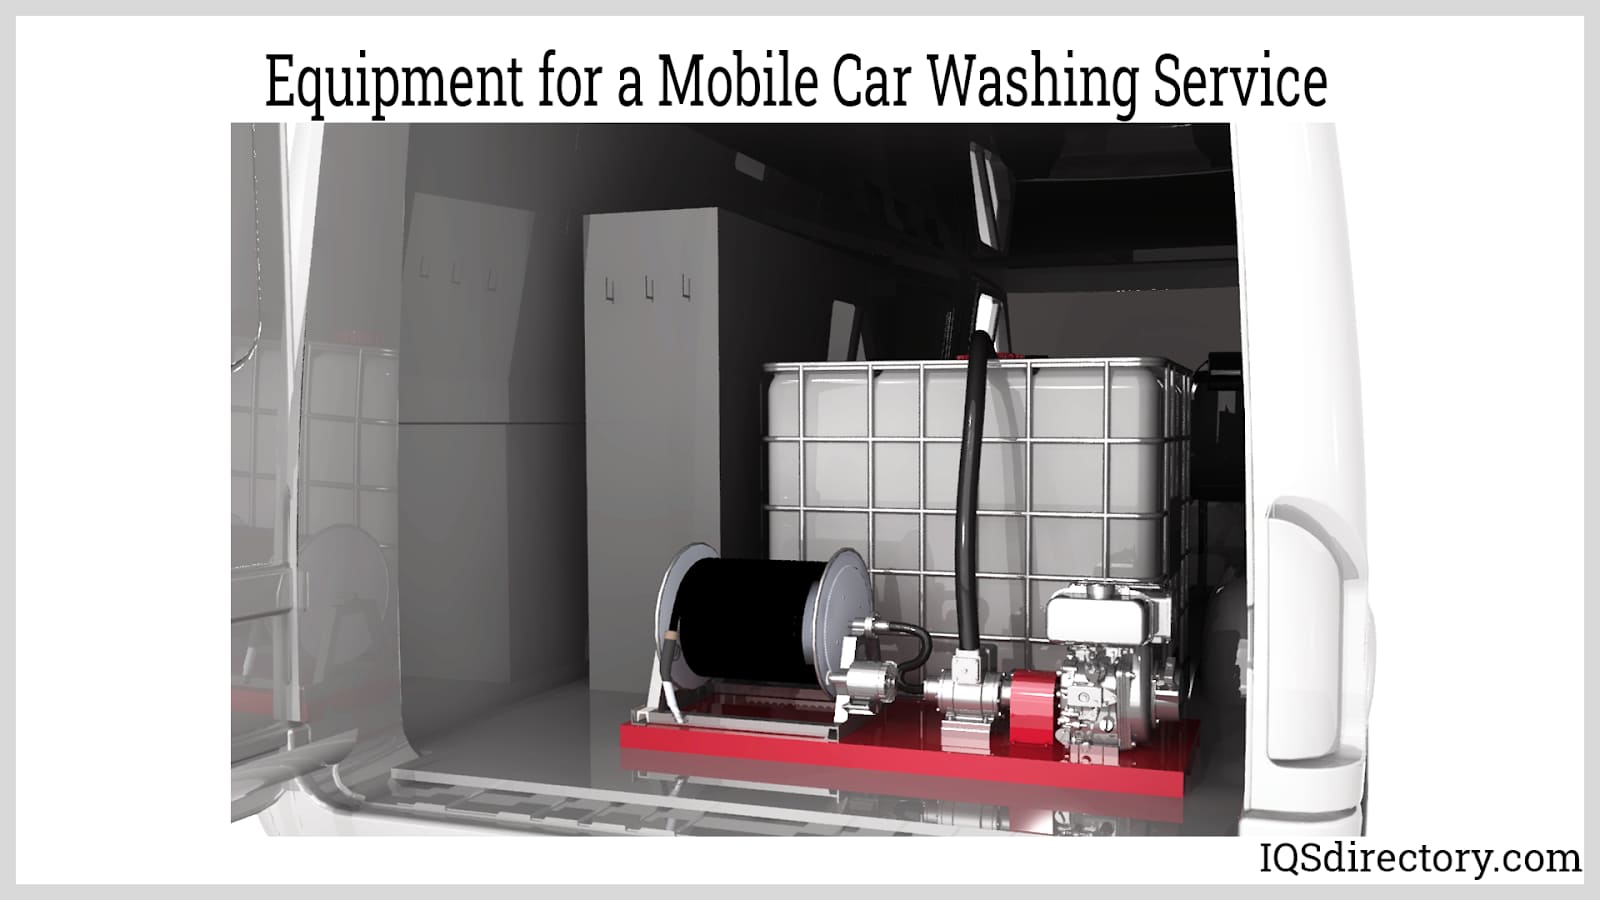 Equipment for a Mobile Car Washing Service